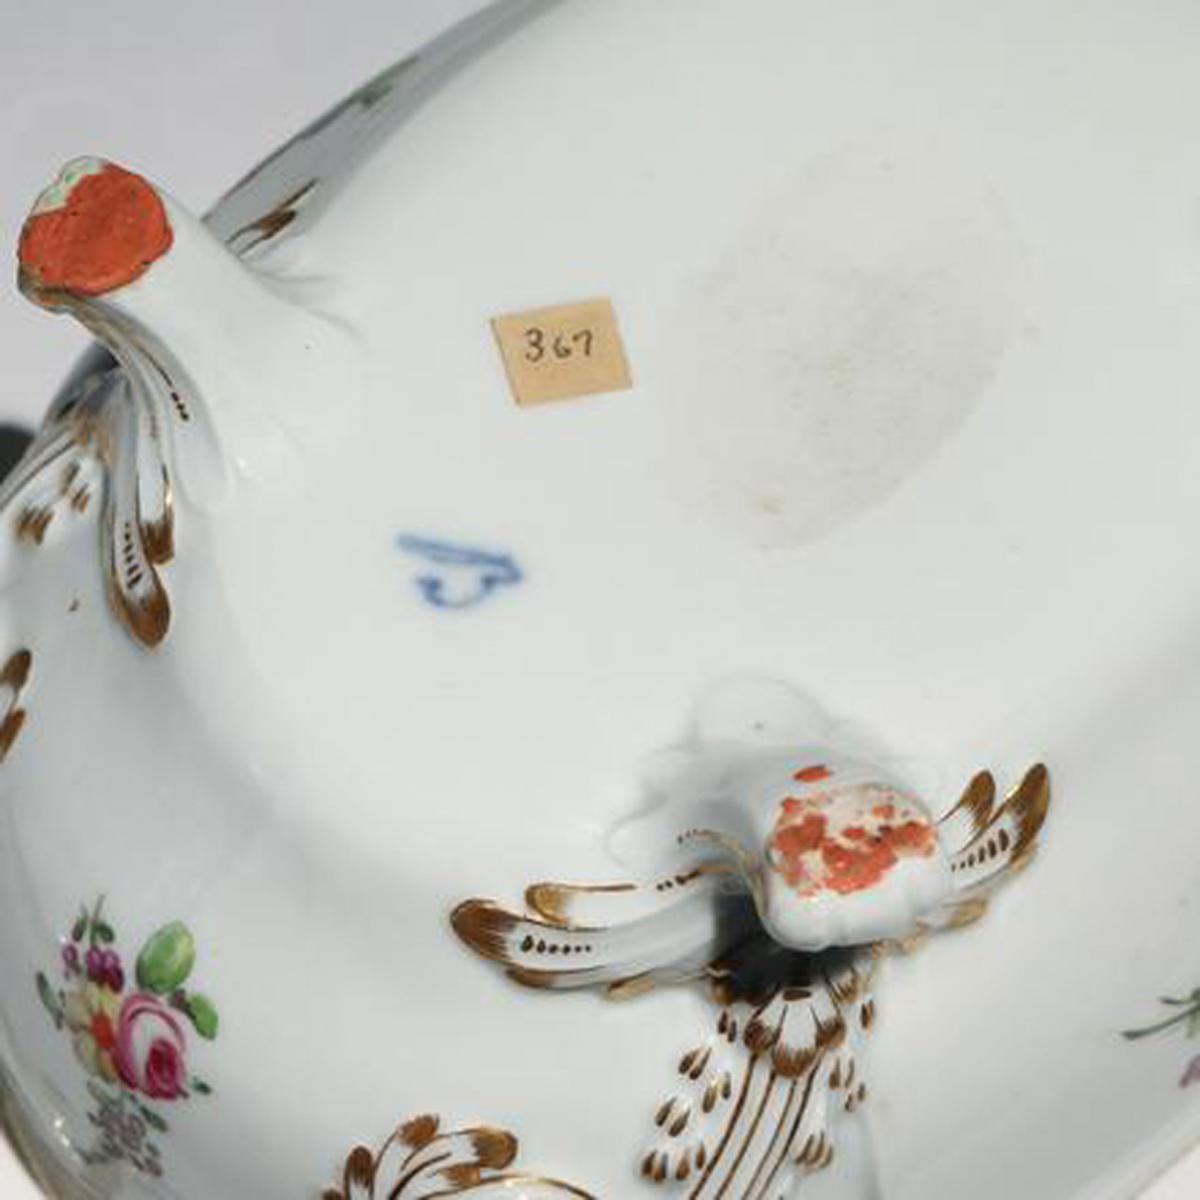 French Porcelain Soup Tureen and Cover, Boissettes Factory, Circa 1780